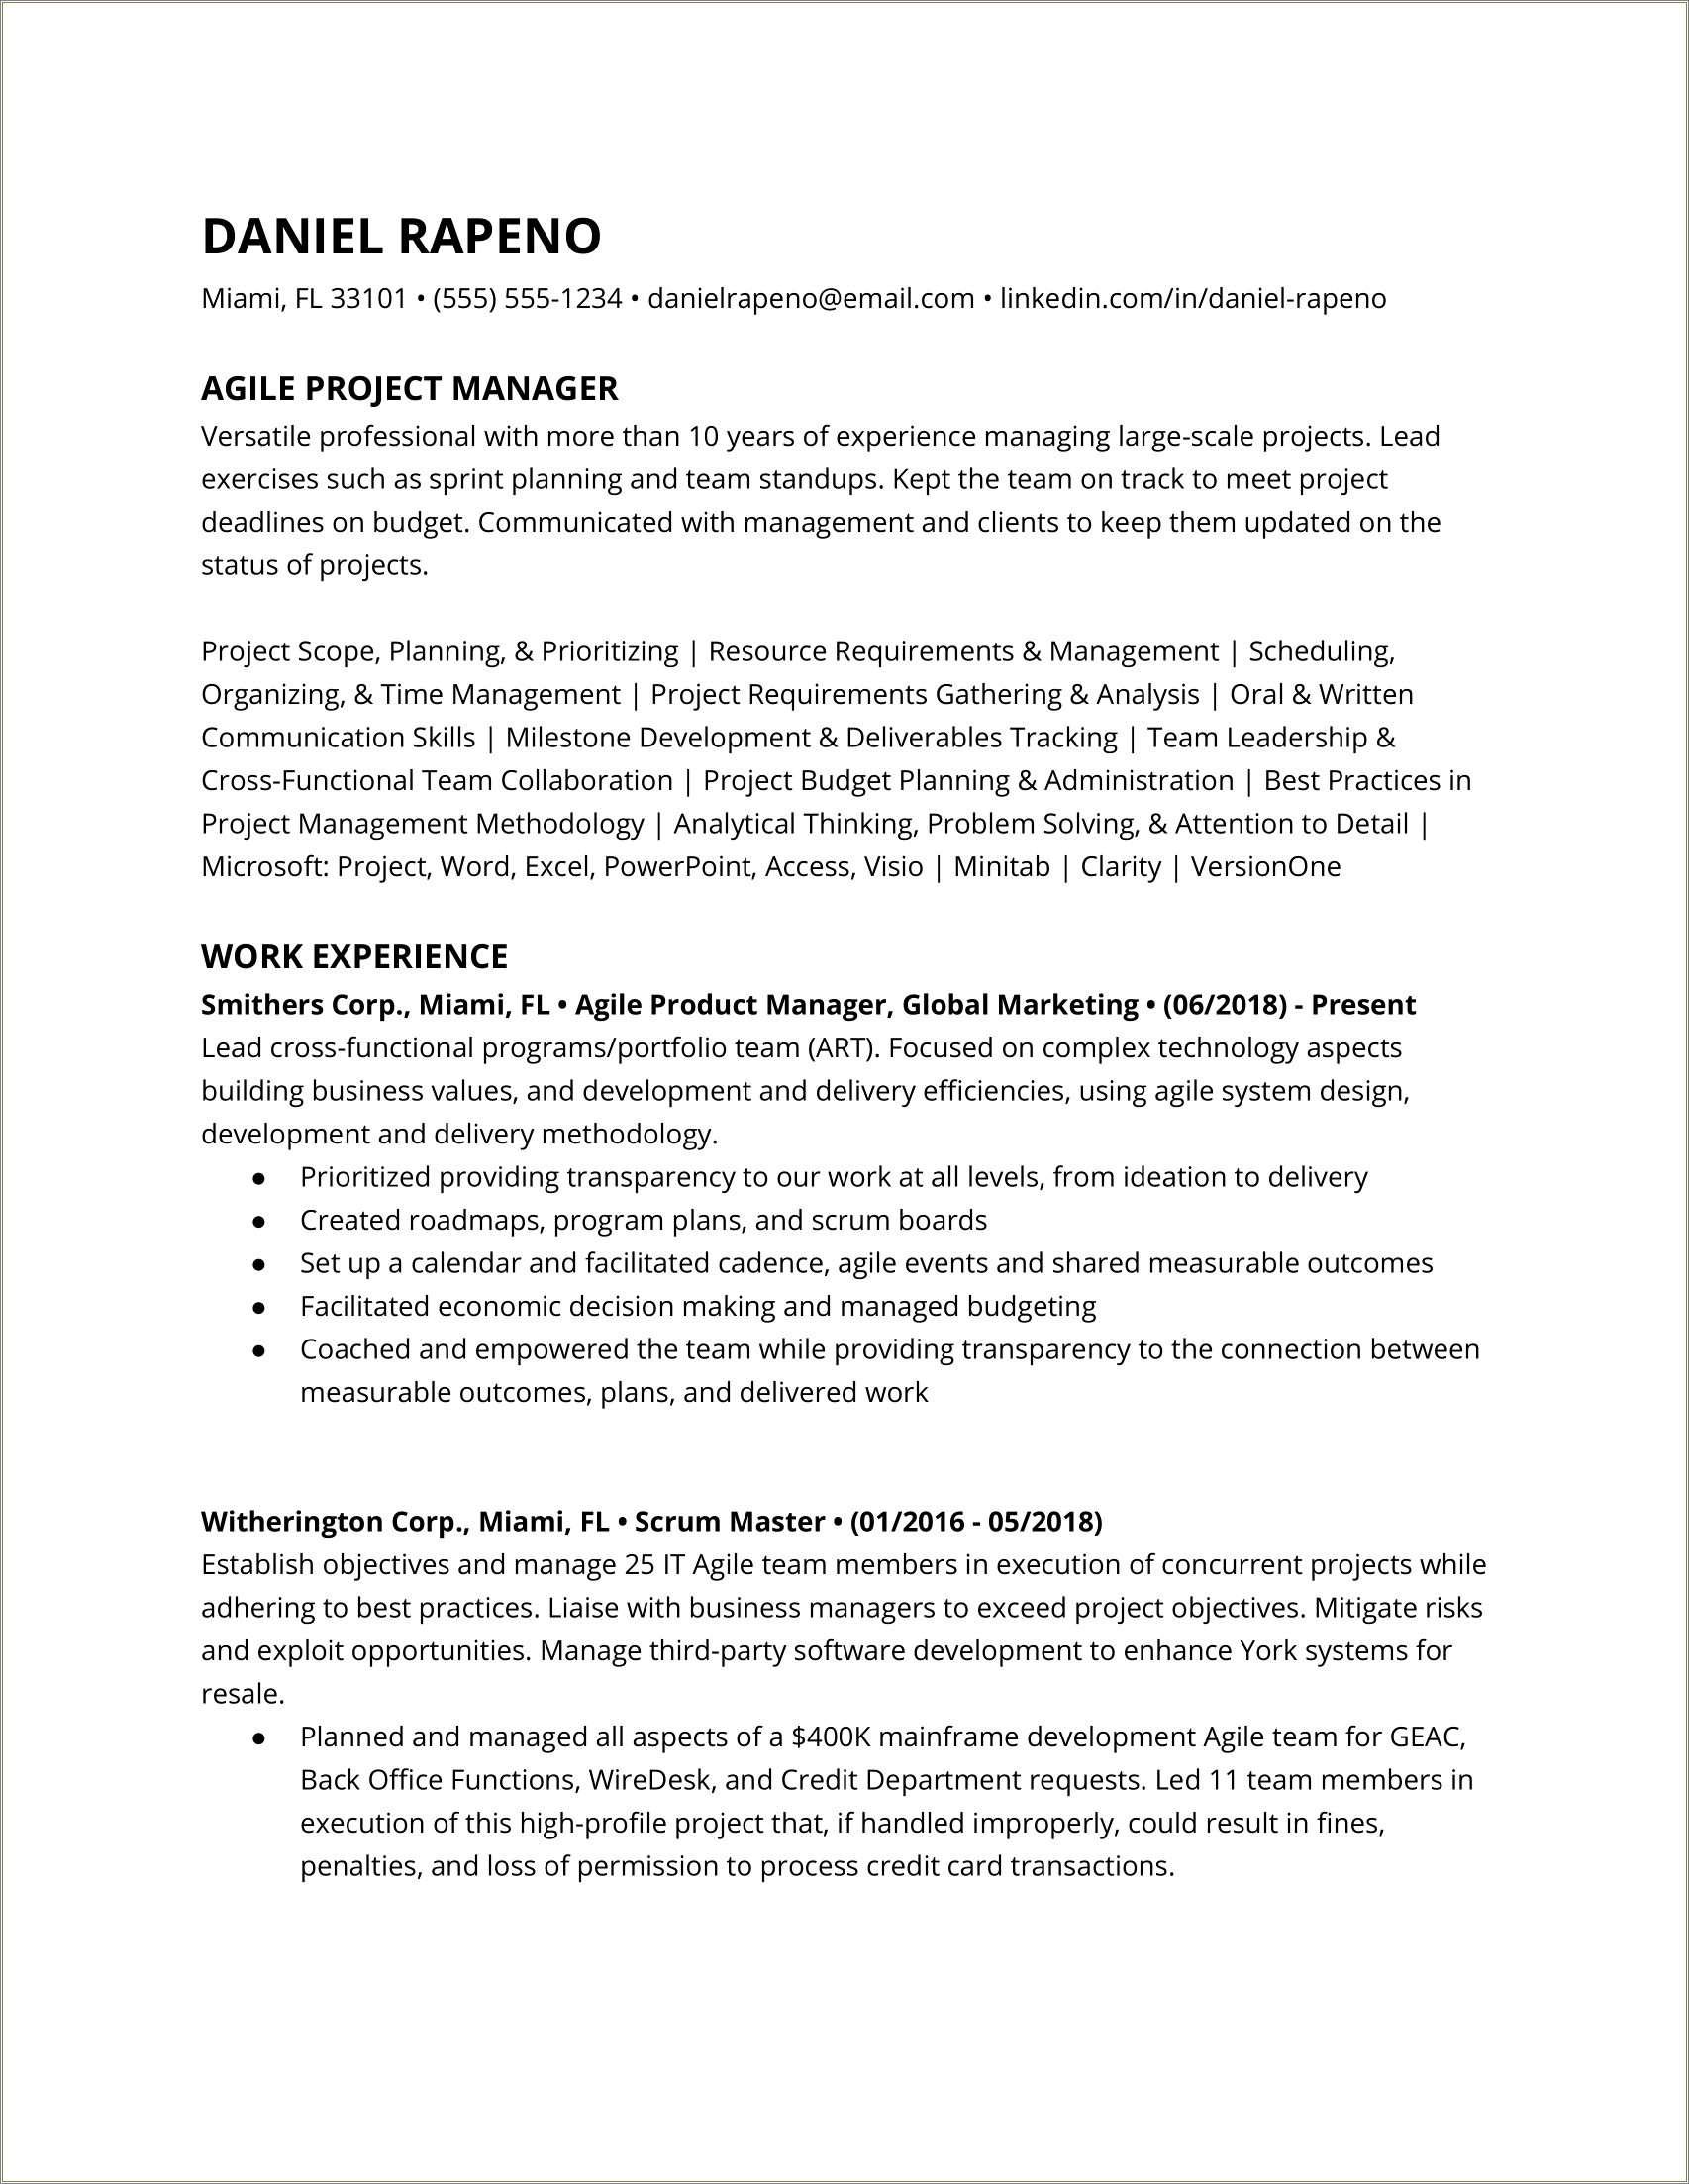 Construction Project Manager Resume With Computer Skills